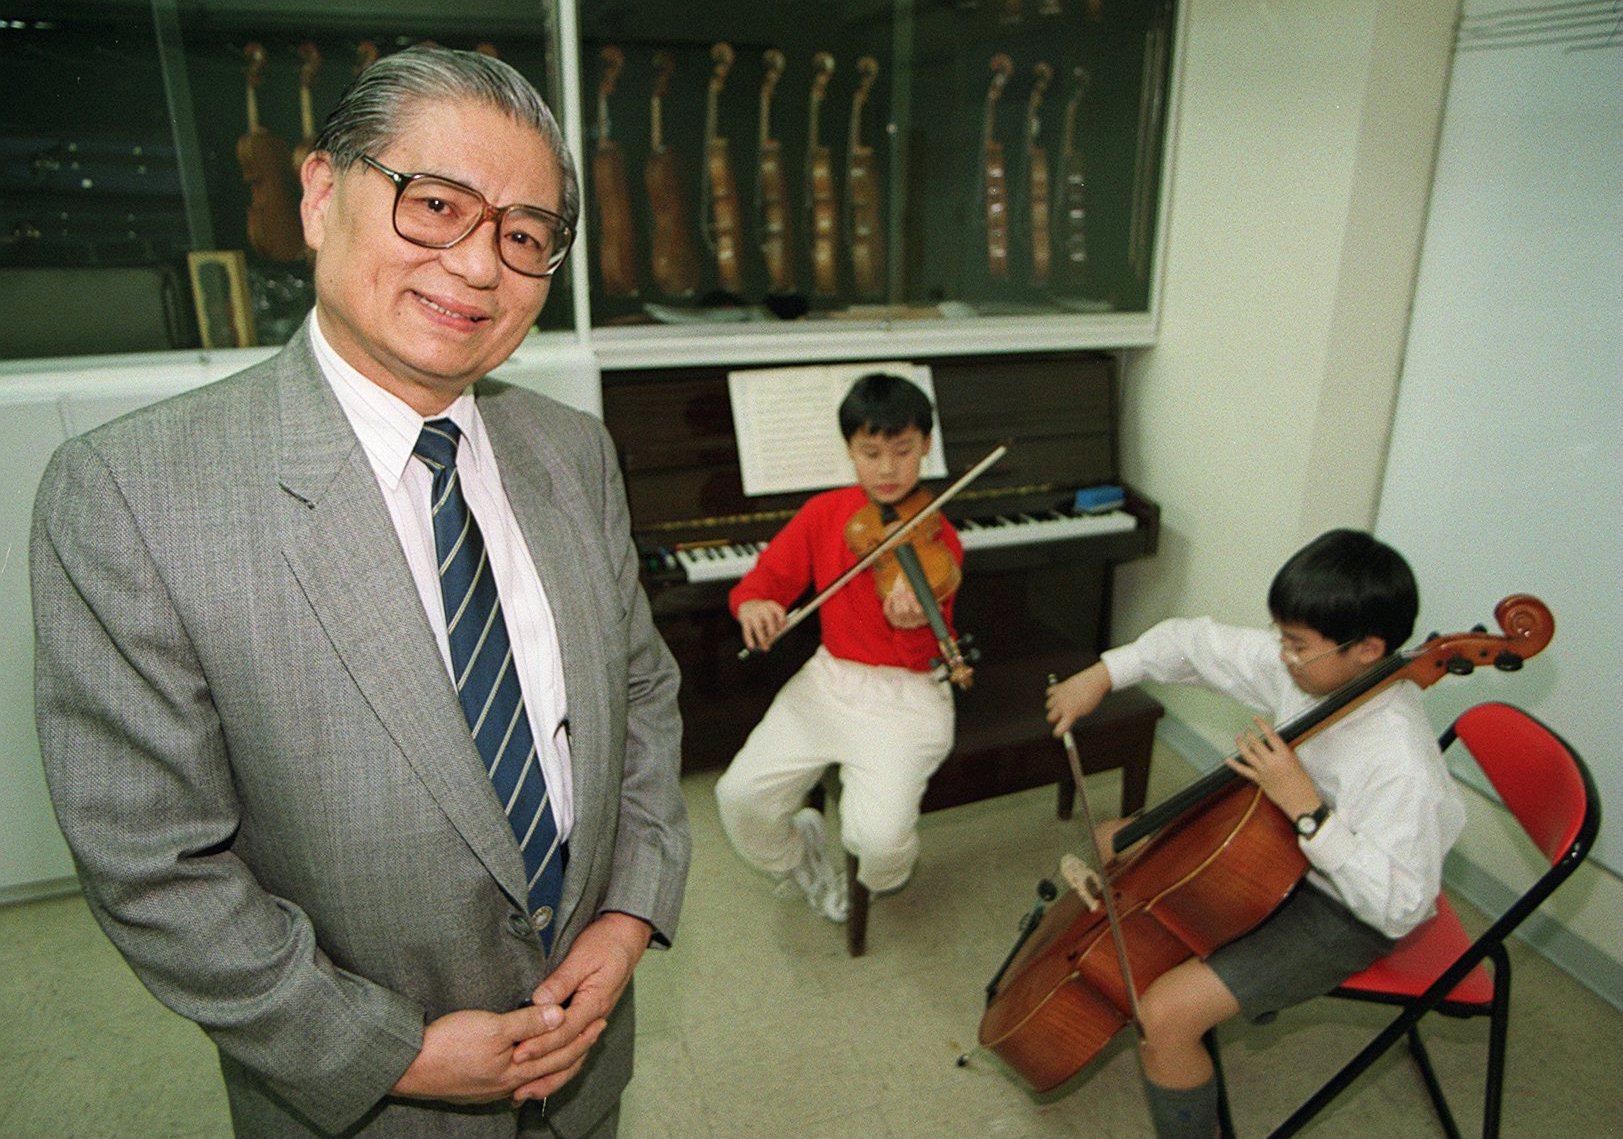 Yip Wai-hong, founder of the Hong Kong Children’s Choir and Yip’s Children’s Choir, in 1997 at the music education centre he founded. Photo: SCMP